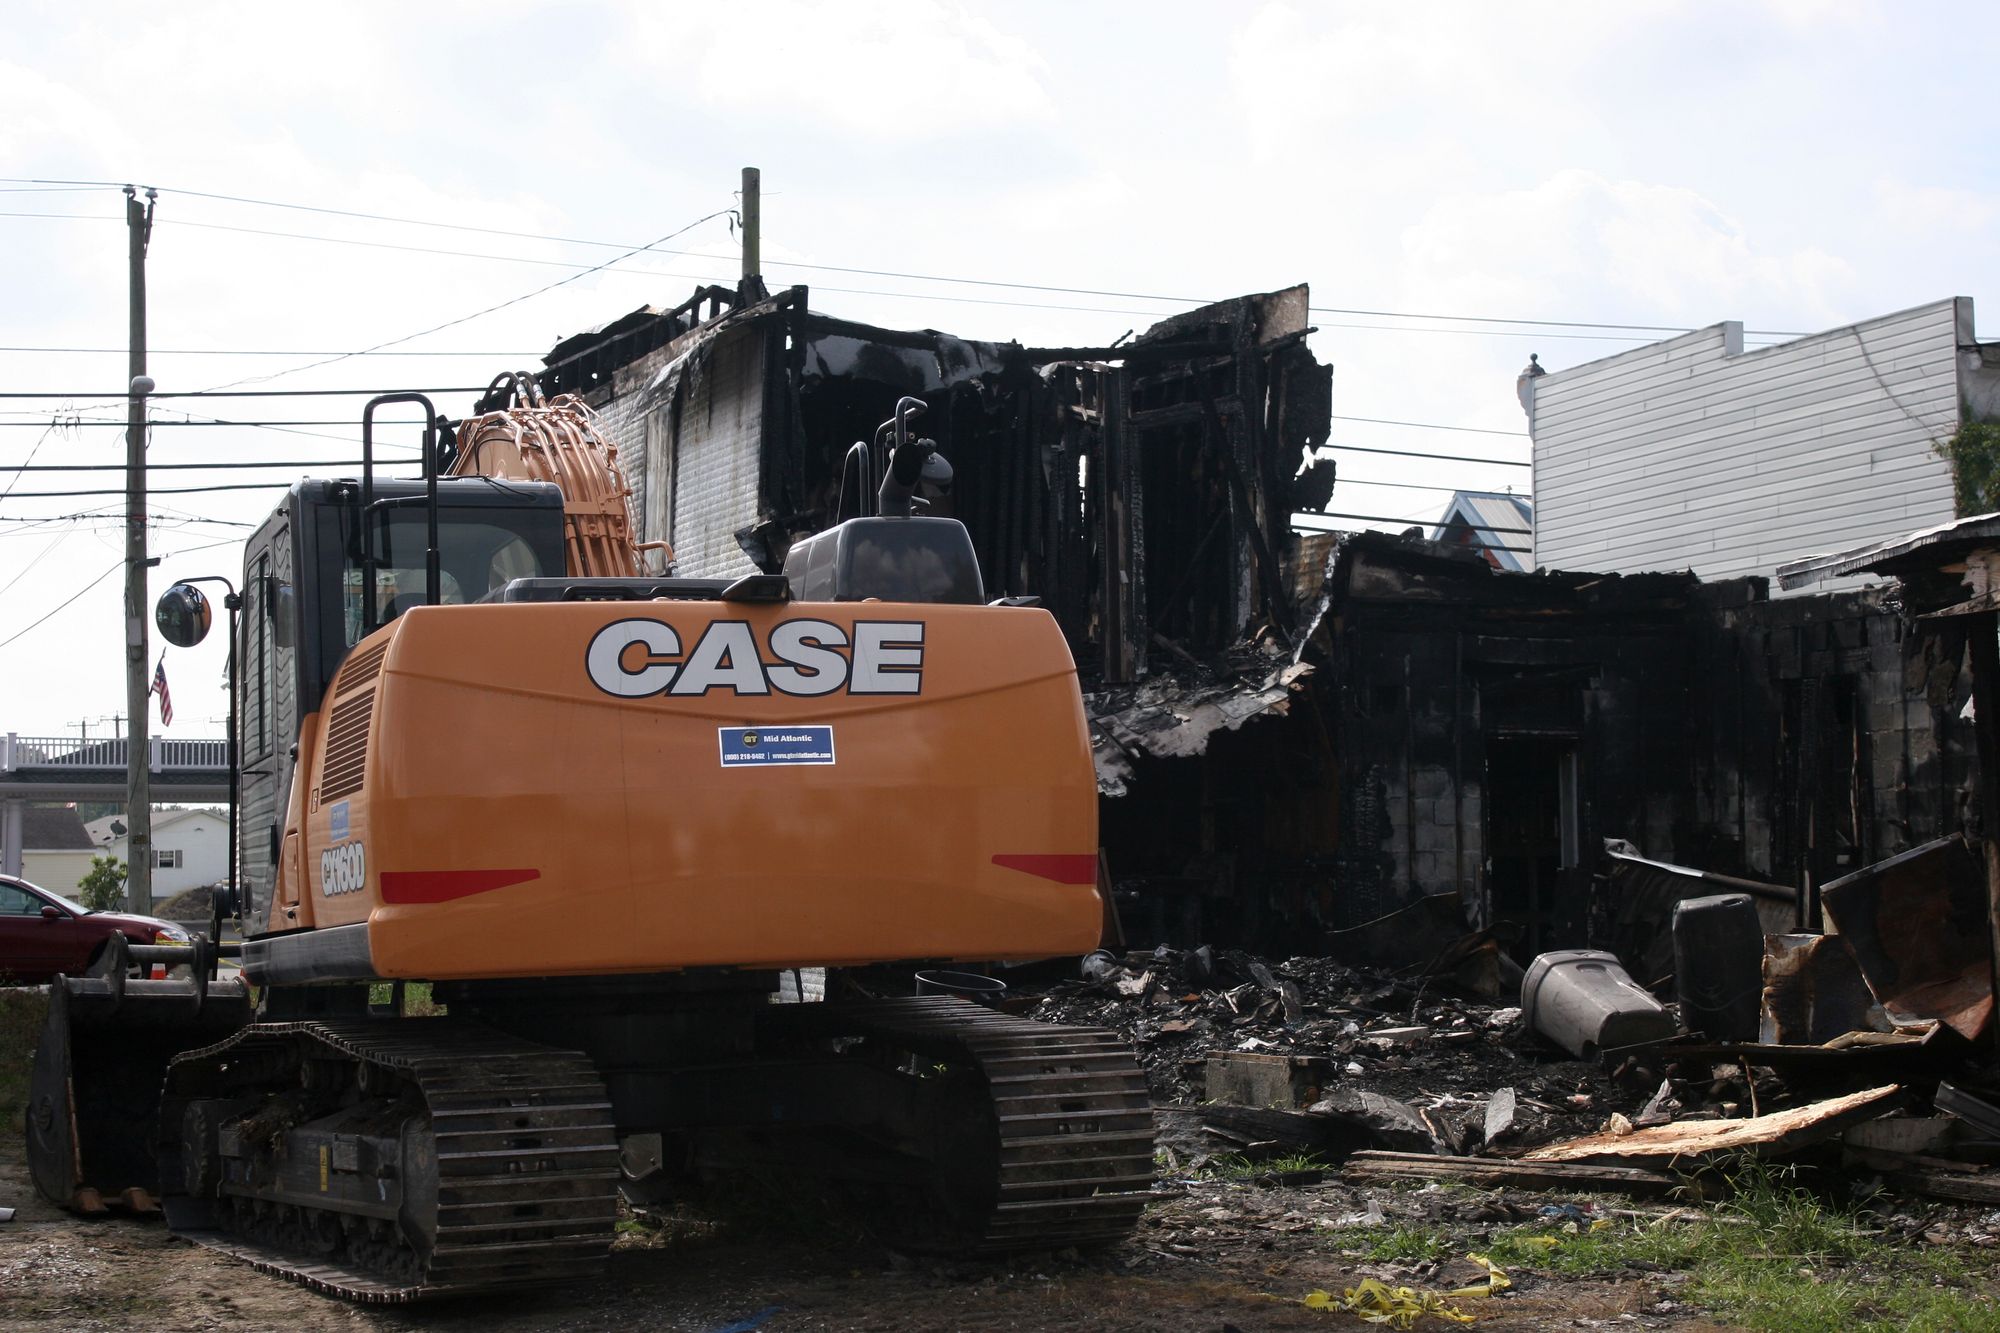 Update: New things ahead at site of burned bar